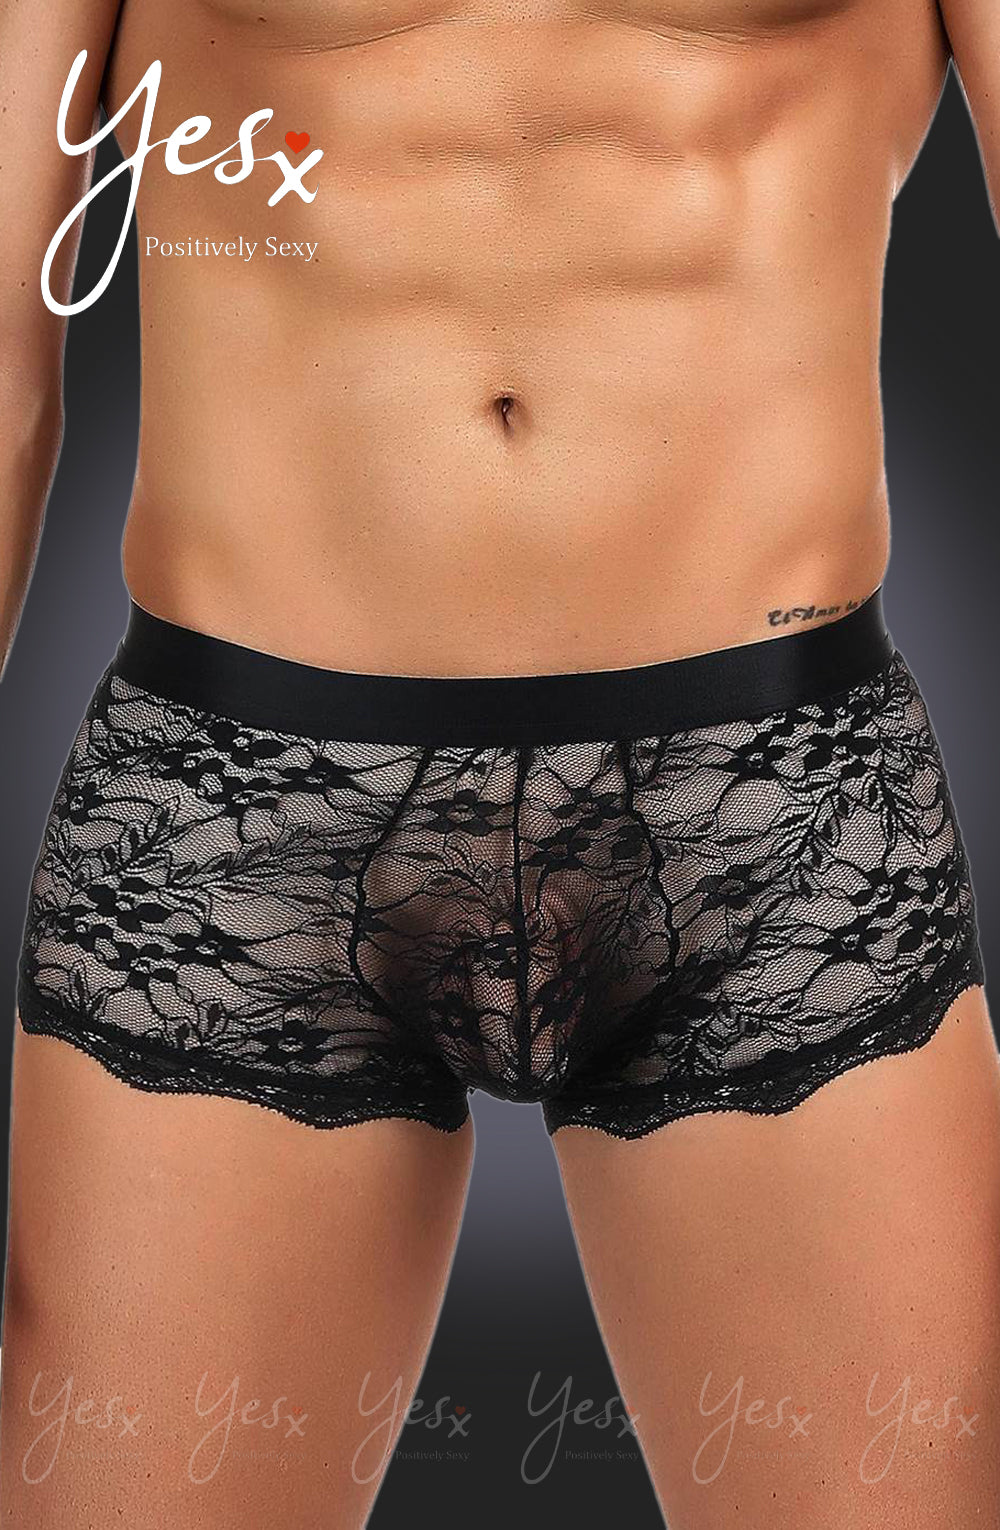 Vibrators, Sex Toy Kits and Sex Toys at Cloud9Adults - YesX YX975 Men's Boxer Brief Black - Buy Sex Toys Online